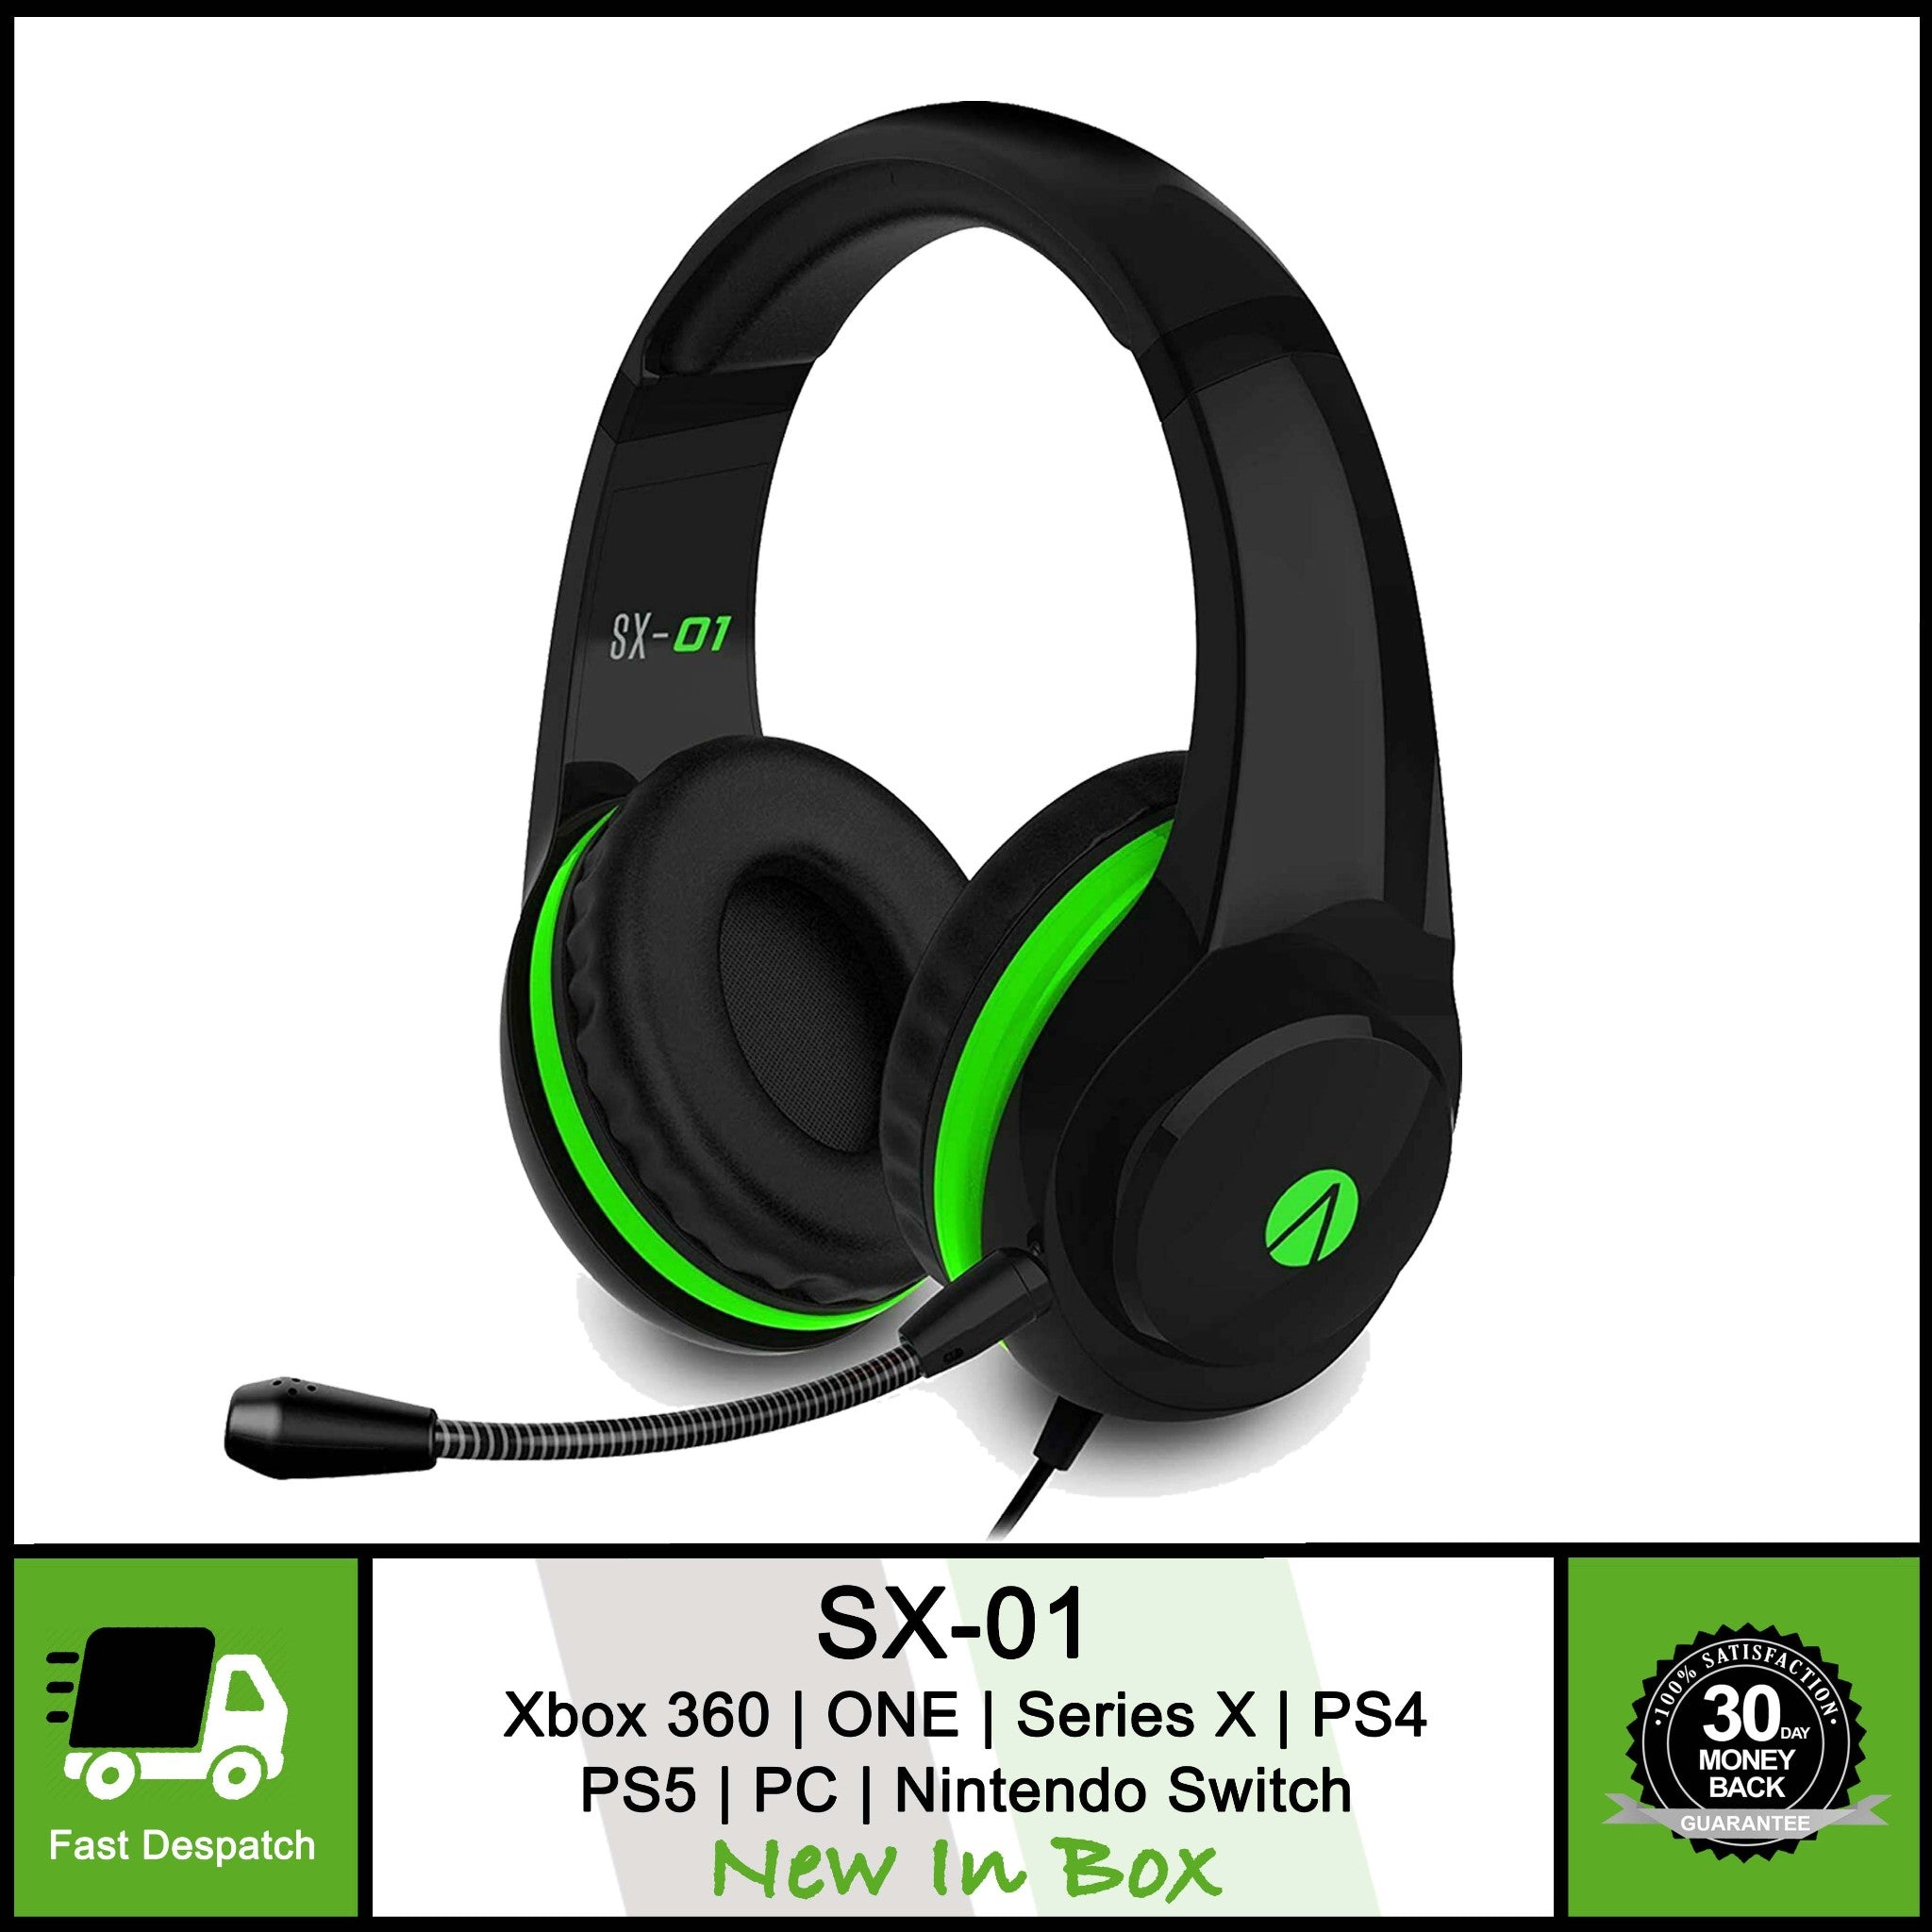 P Microsoft Wired Gaming Headset Xbox Stereo InSpireVideoGames For – Stealth One/S/X SX-01